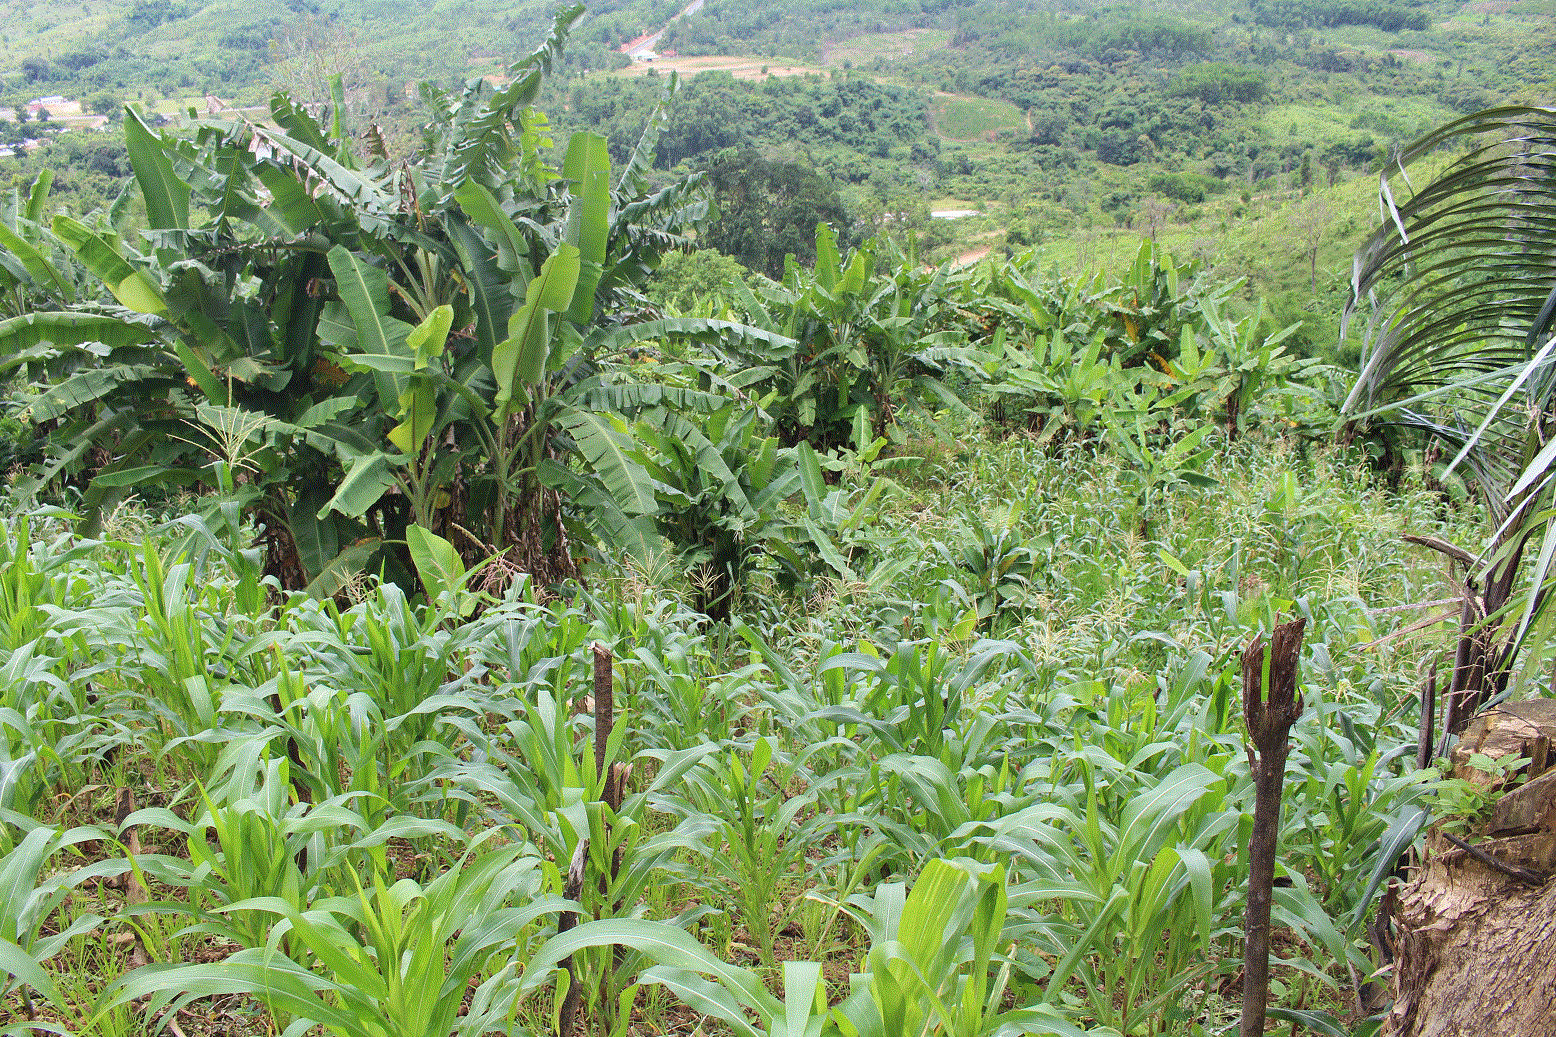 Banana cultivation in sloping land